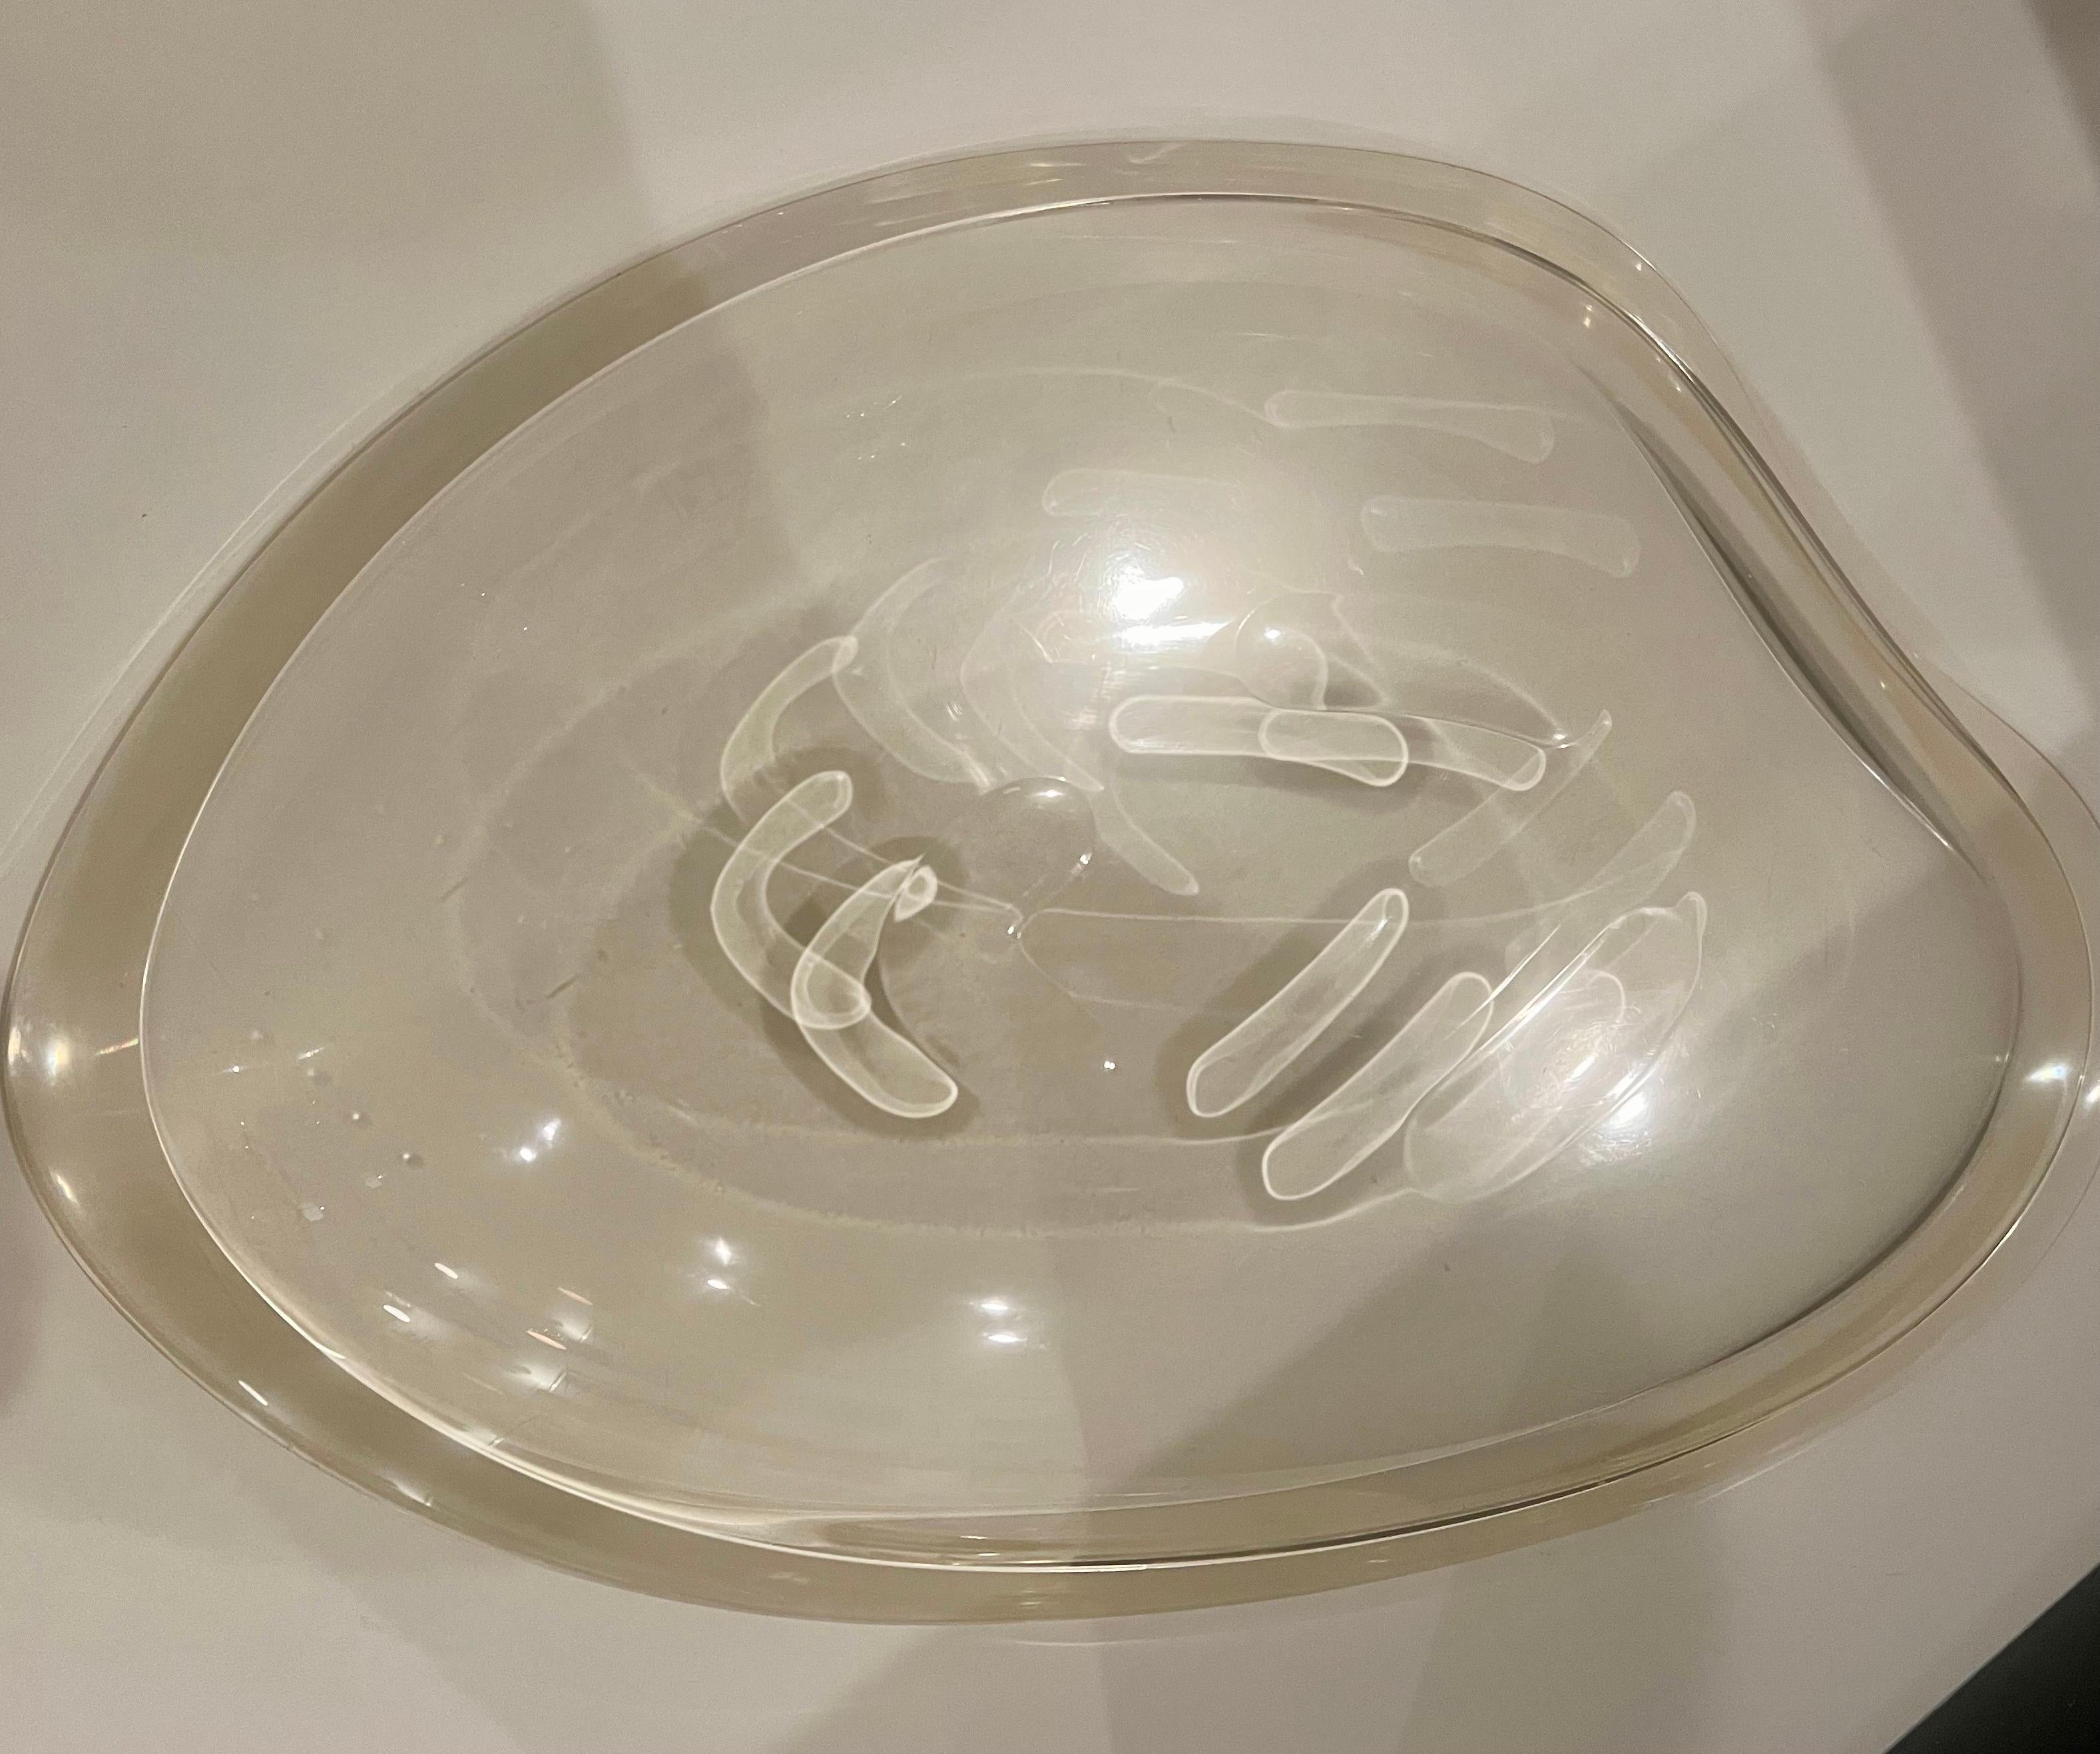 Pristine Mid-Century Large Biomorphic Lucite Bowl Attributed To Ritts In Excellent Condition For Sale In San Diego, CA